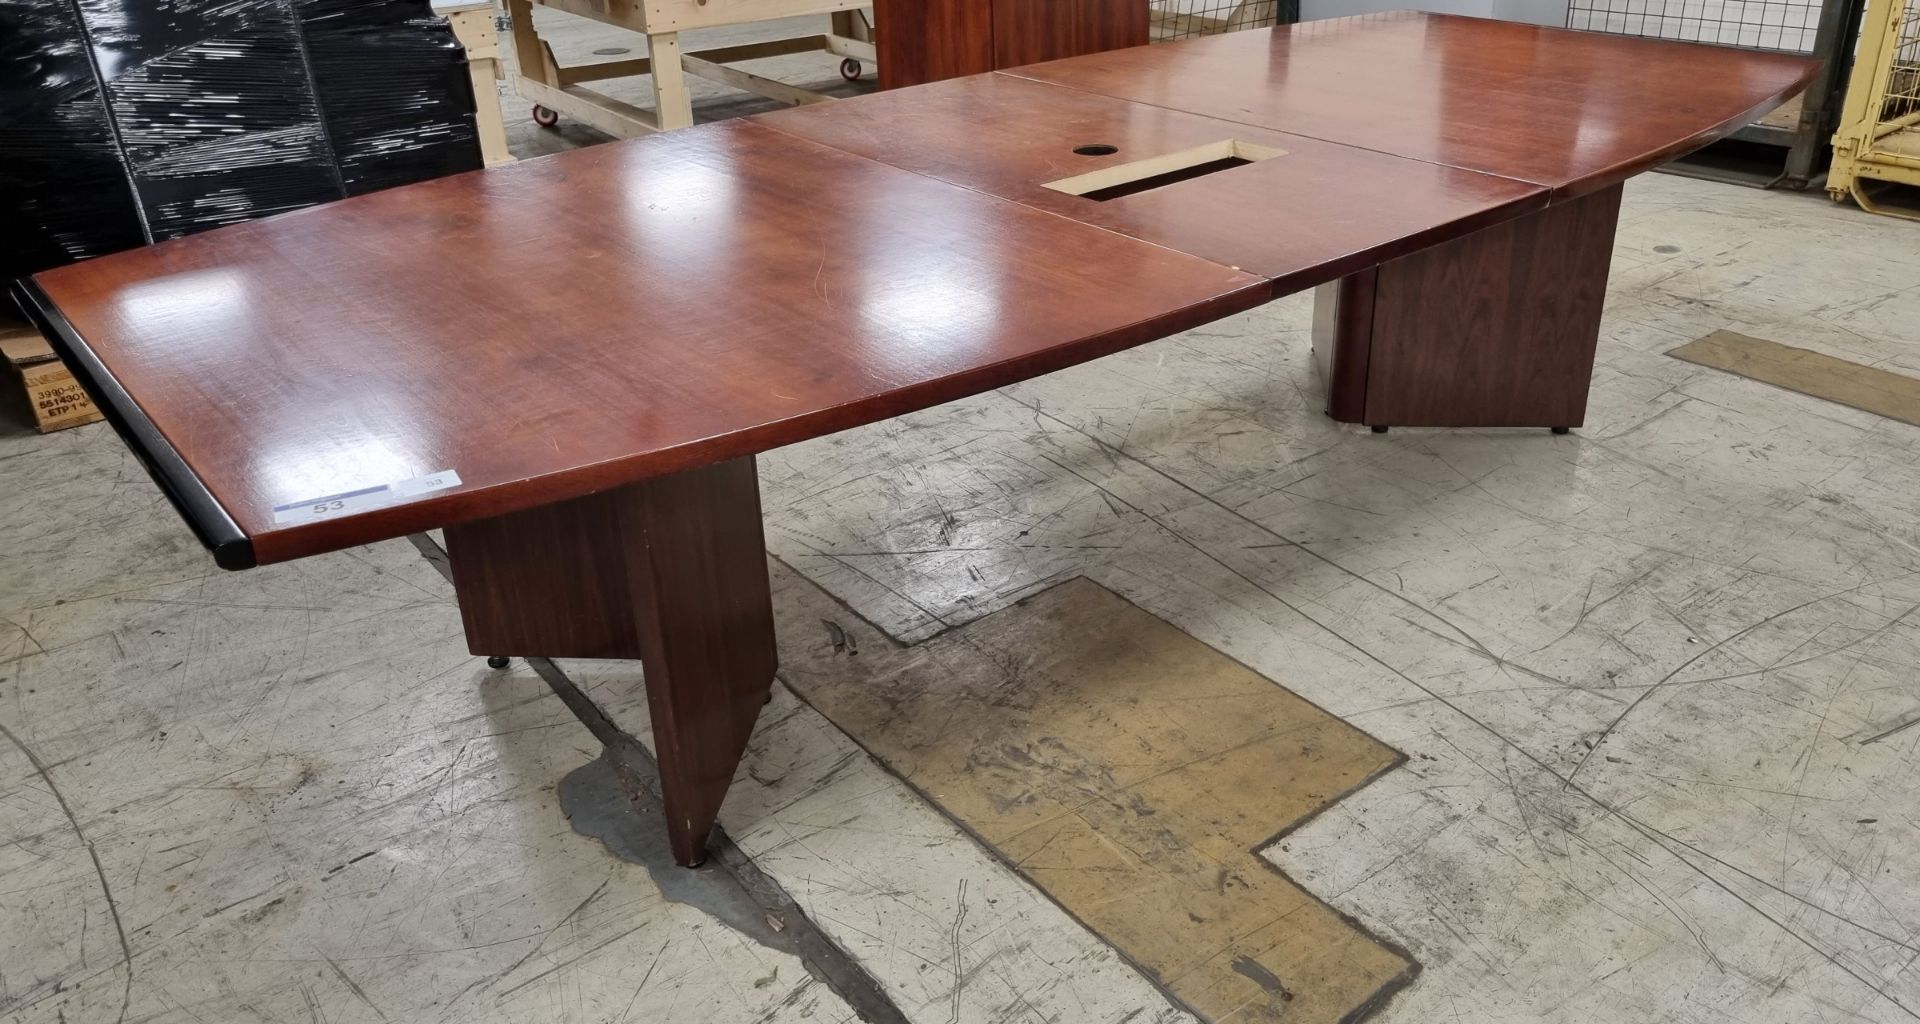 Rosewood 3 part sectional boardroom table on pedestal - L 2900 x W 1300mm - Image 14 of 15